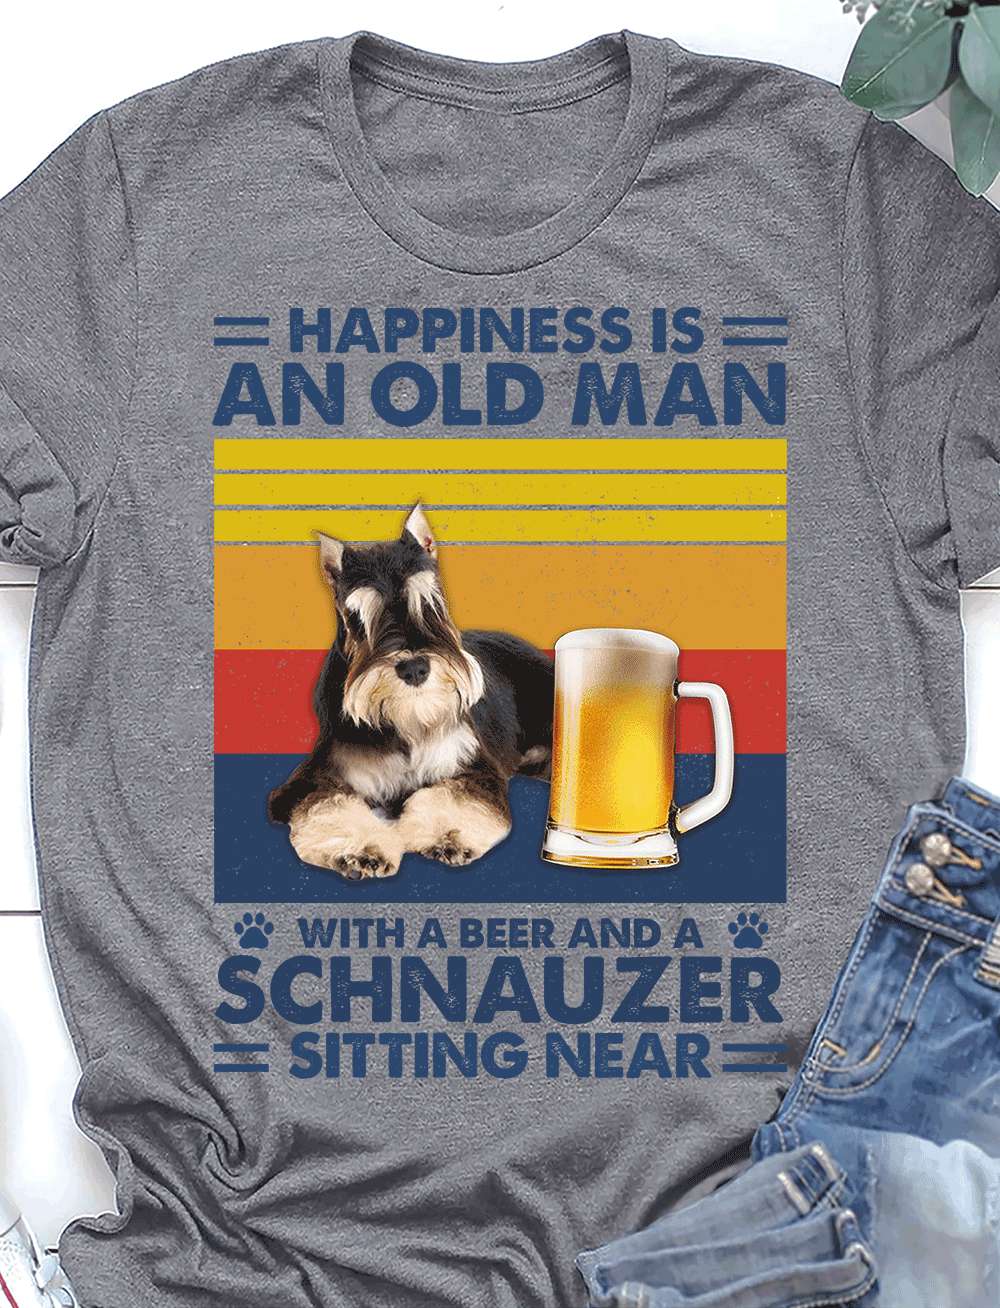 Schnauzer Beer - Happiness is an old man with a beer and a schnauzer sitting near